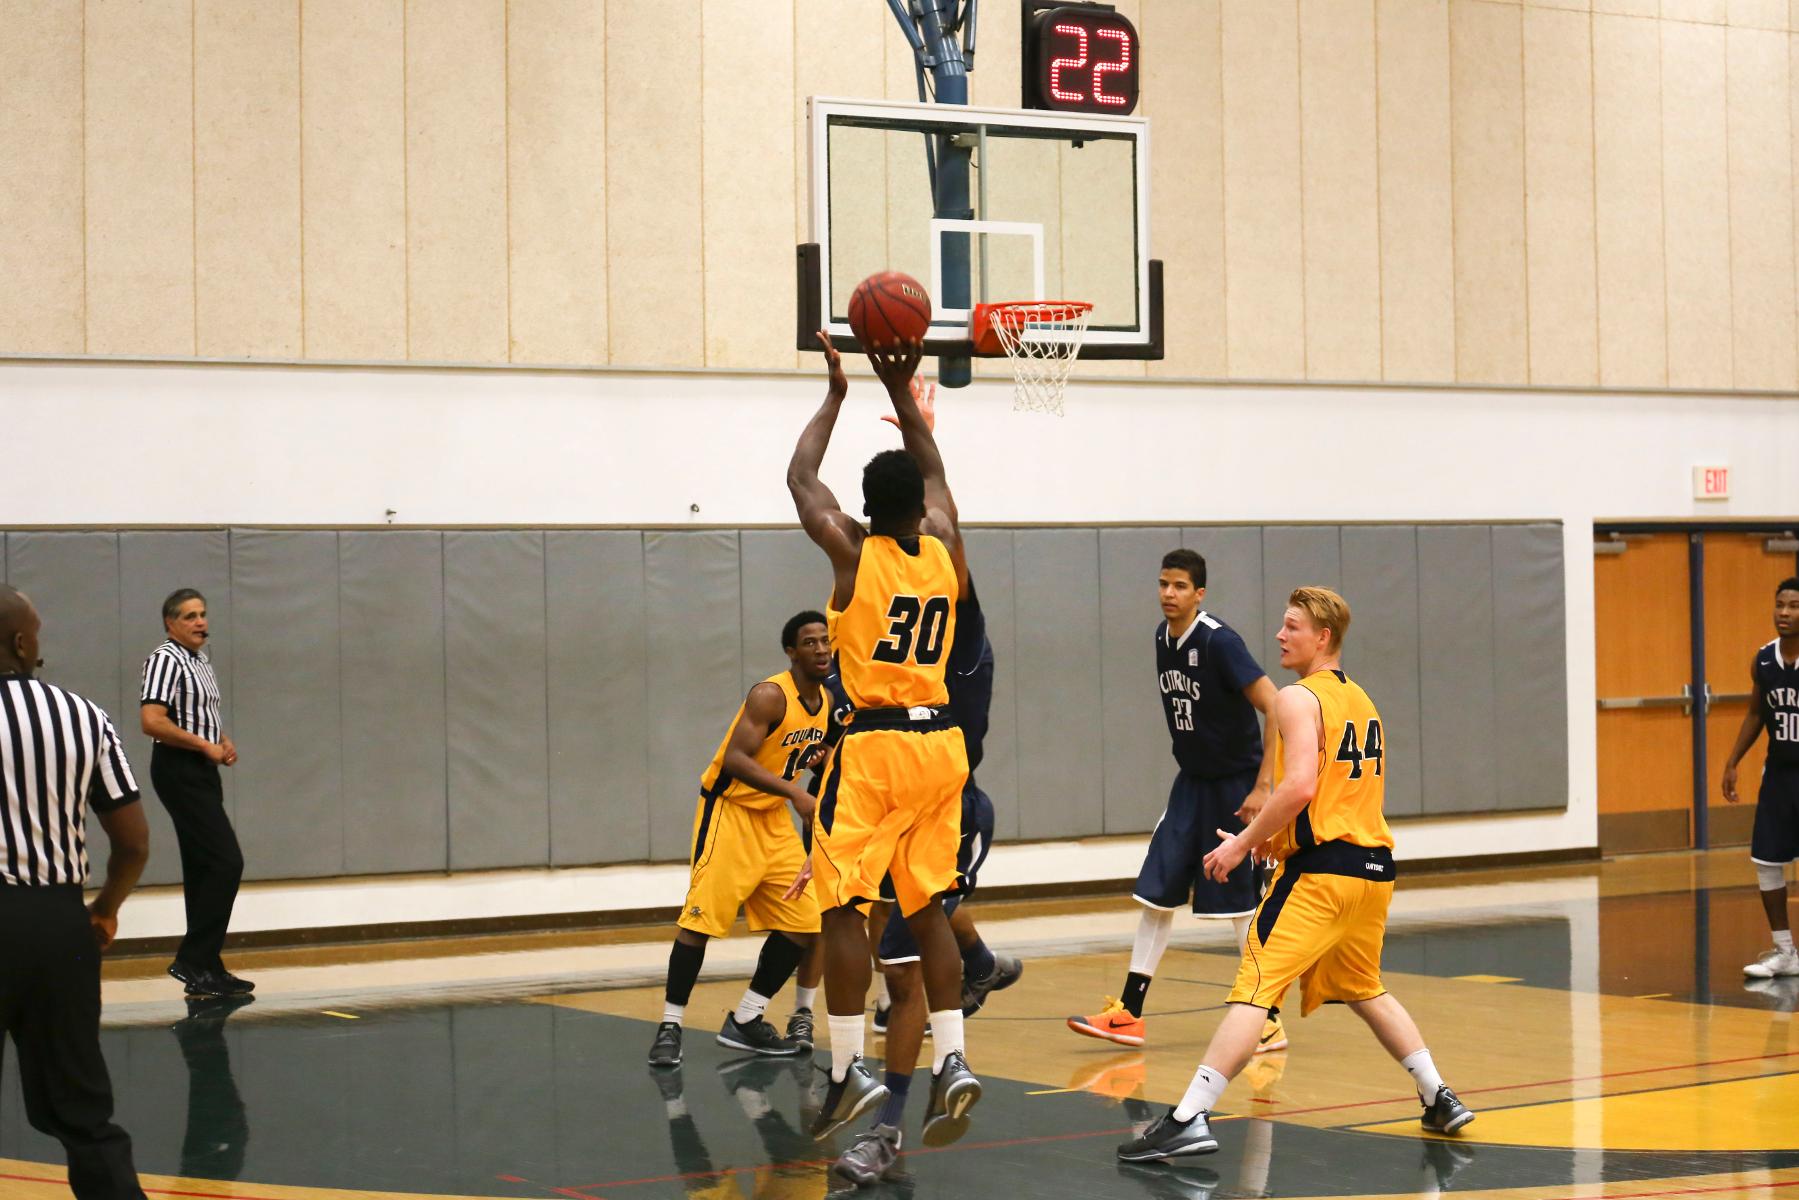 Cougars Fall Short in 92-62 Home Loss to Citrus College